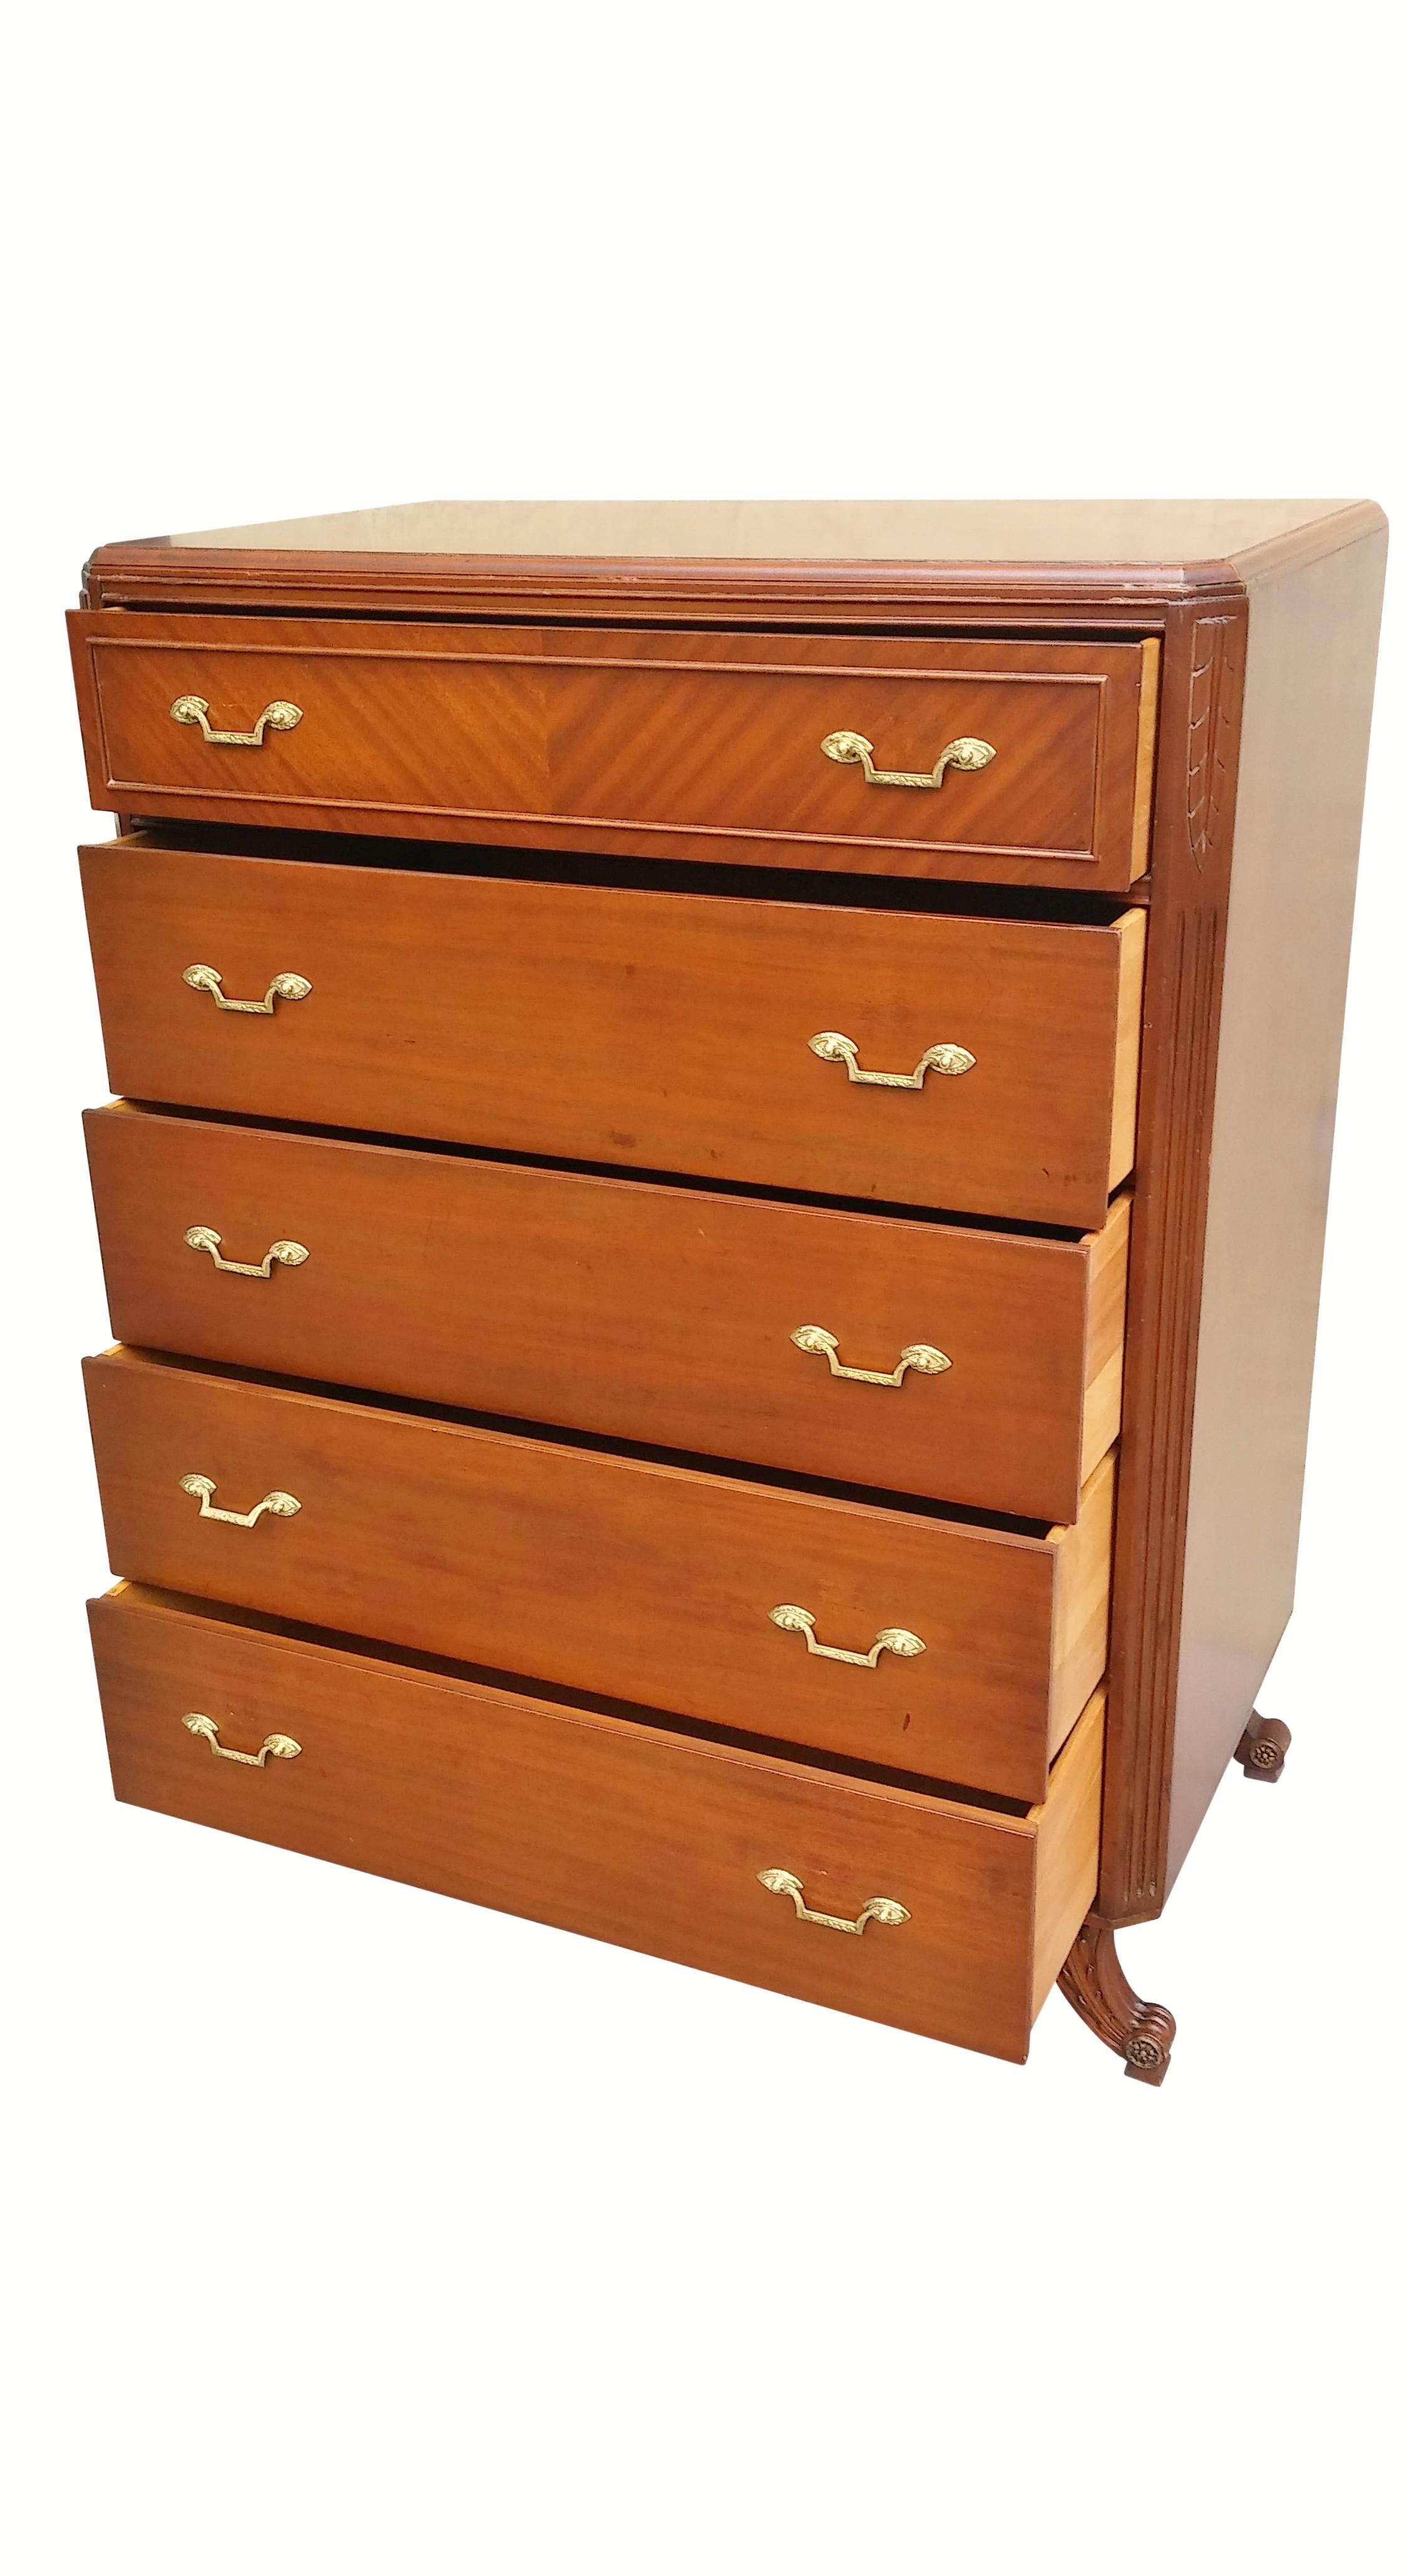 A Neoclassical style chest of drawers made by Rway Northern Furniture Company of Sheboygan, Wisconsin. Made of mahogany, five dovetailed drawers open with squared brass handles. The top drawer has a tiger mahogany front panel and a central divider